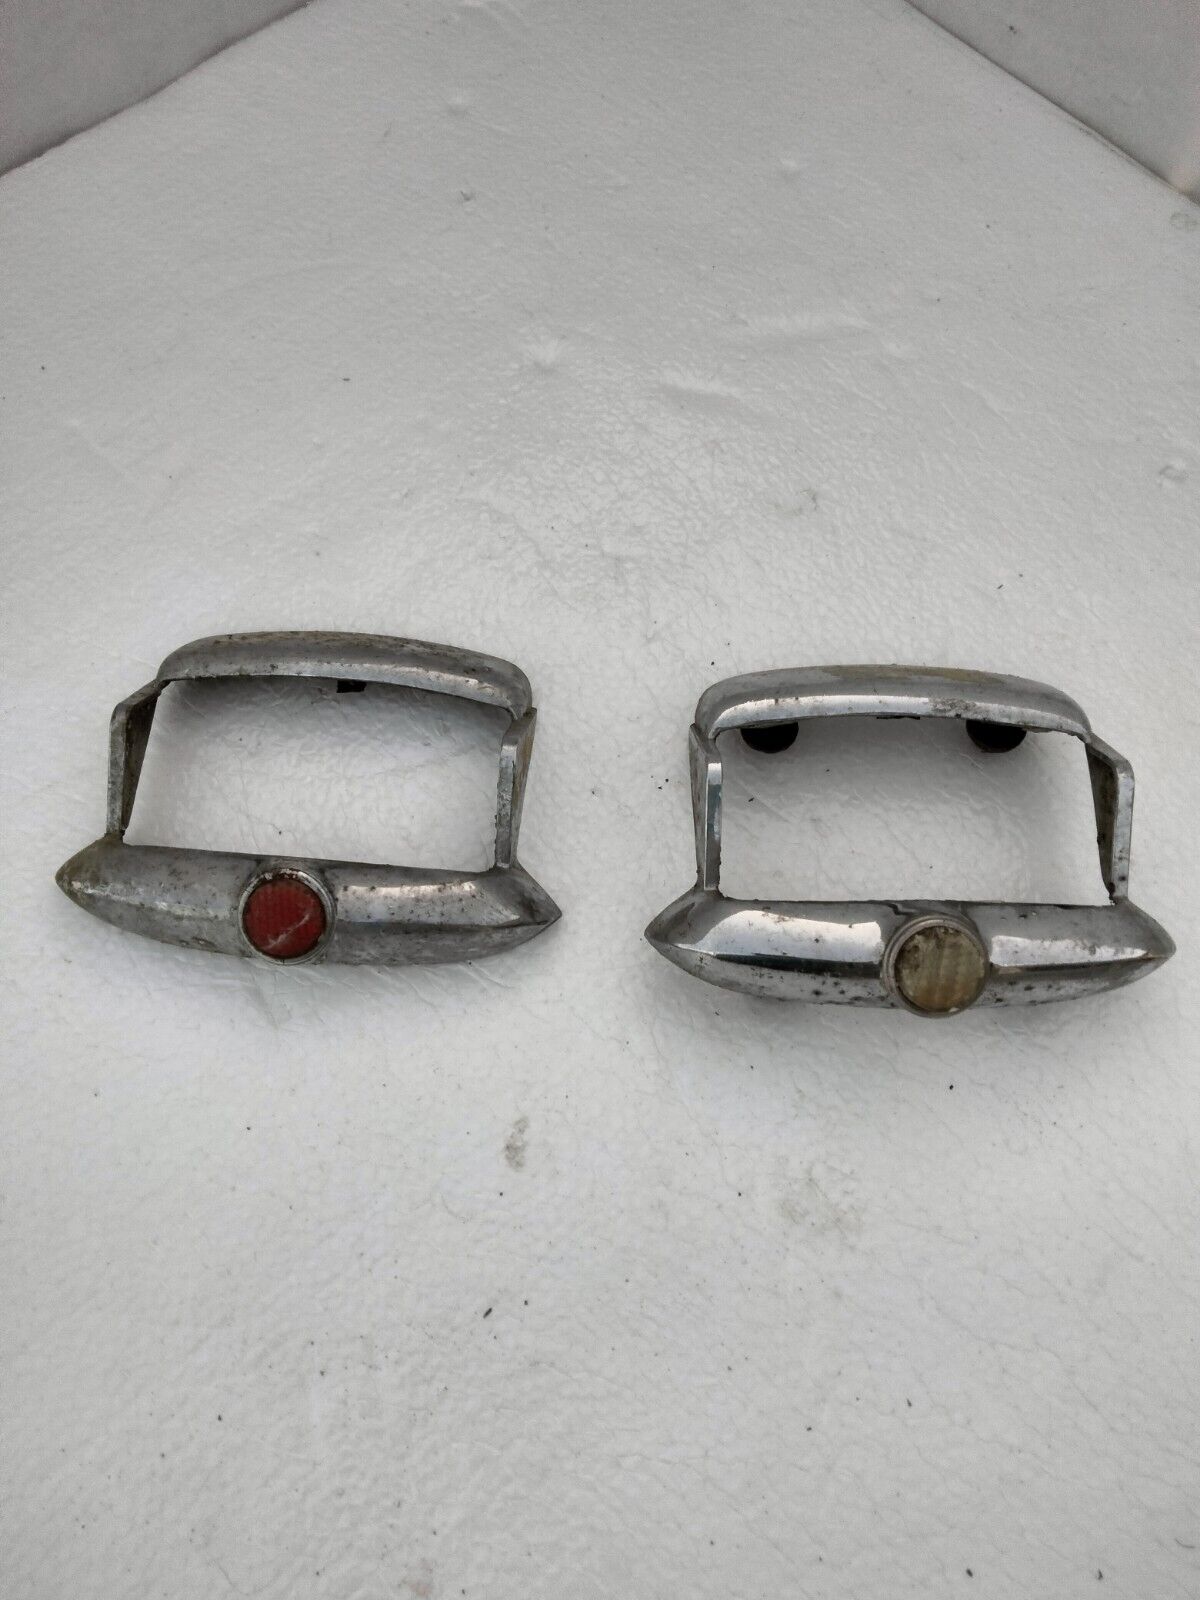 1946 1947 1948 PLYMOUTH DODGE TAIL LIGHT BEZEL PAIR USED DRIVER QUALITY